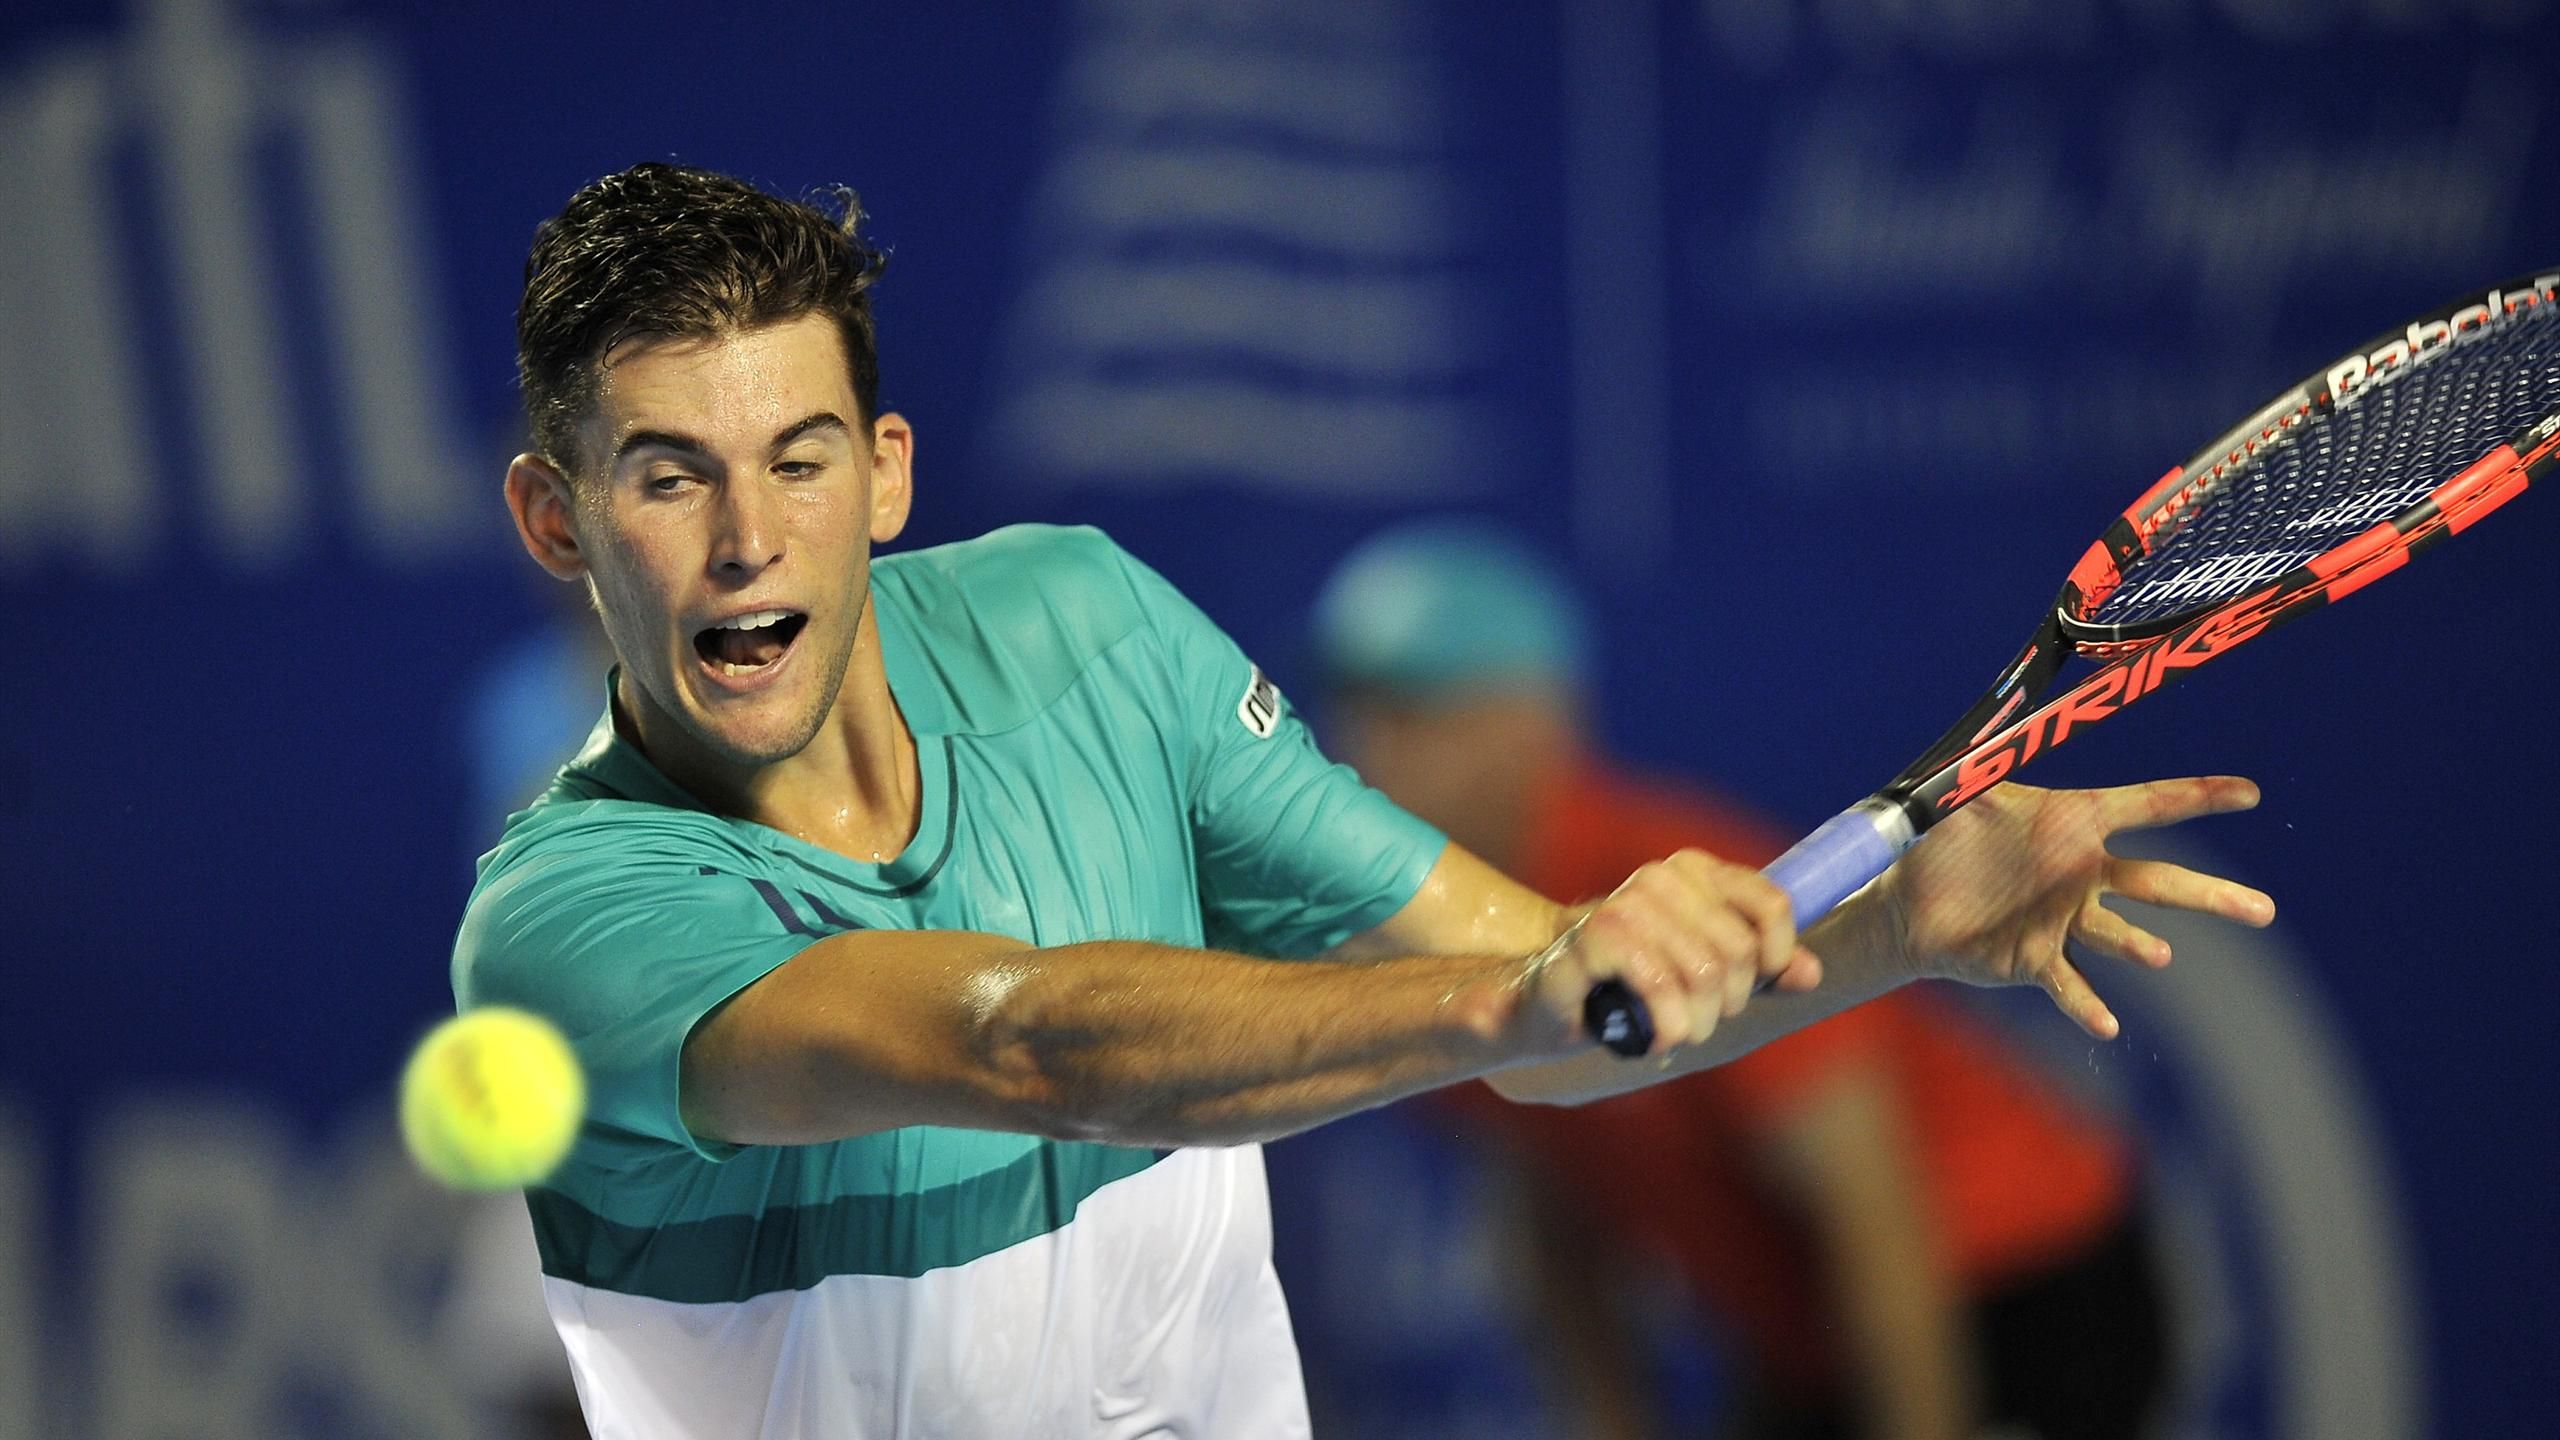 Grigor Dimitrov ousted by Dominic Thiem in Acapulco, Bernard Tomic through 